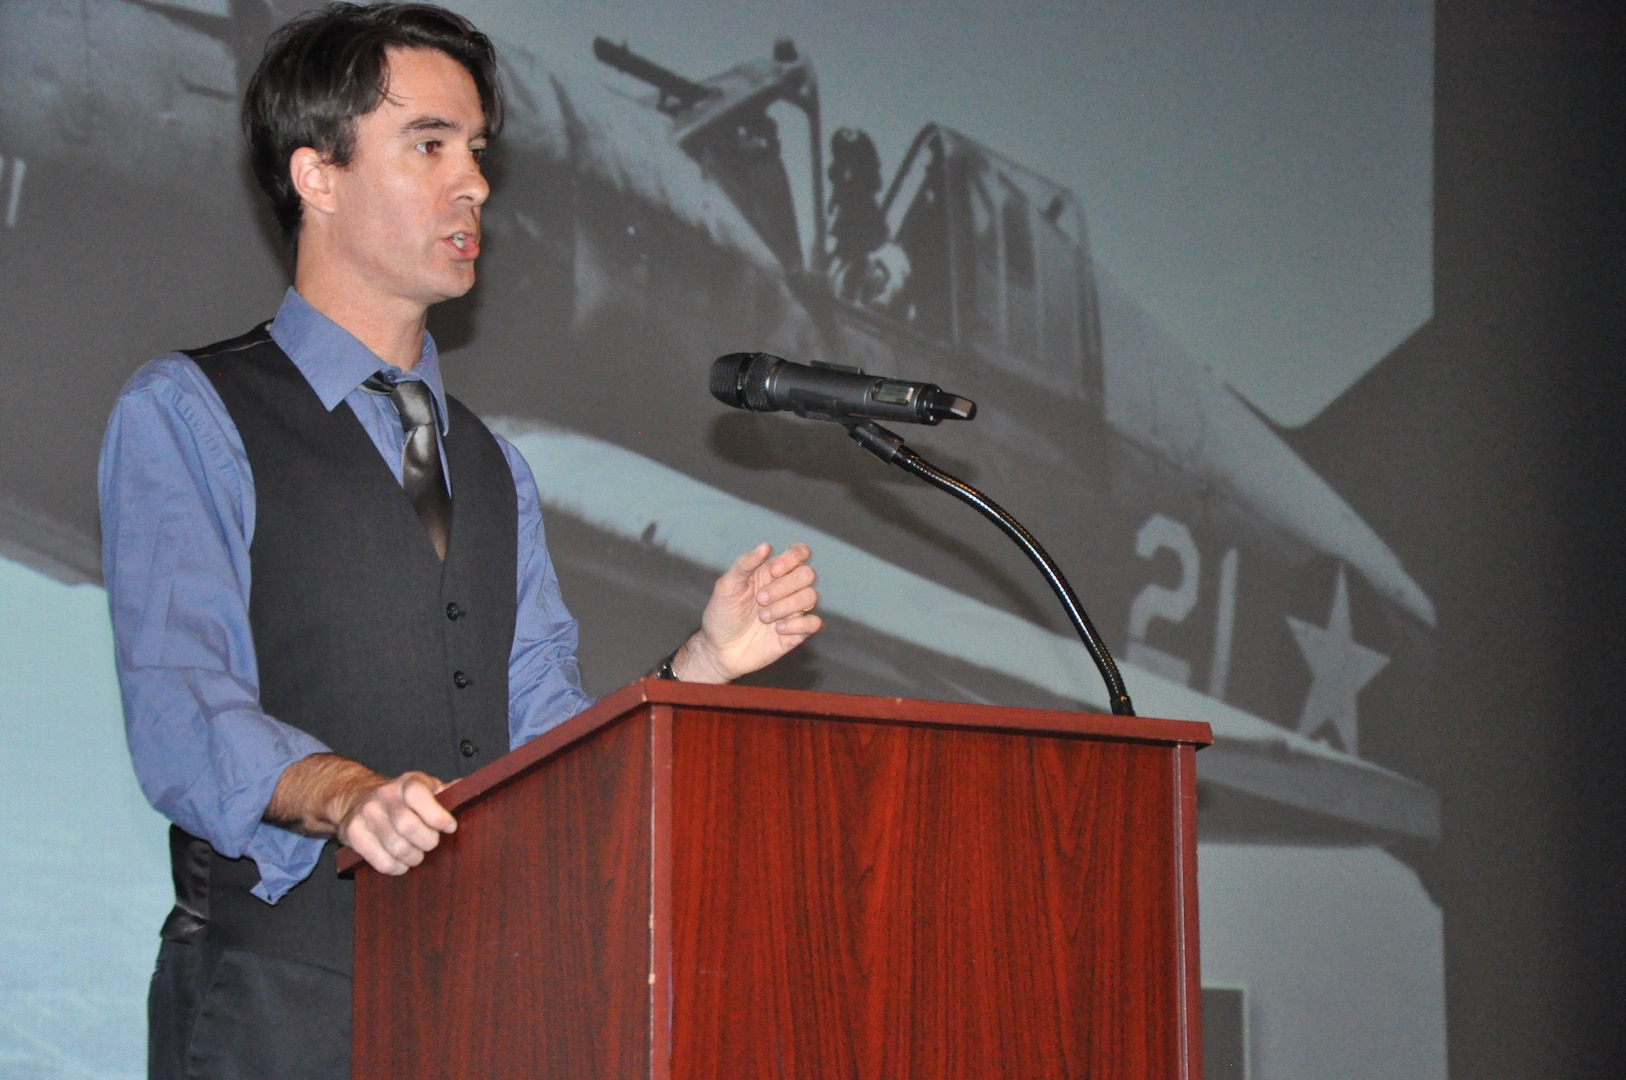 IMAGE: DAHLGREN, Va. (Nov. 15, 2019) - Timothy Orr, an associate professor of military history at Old Dominion University, and co-author of “Never Call Me A Hero:  A Legendary American Dive-Bomber Pilot Remembers the Battle of Midway,” stresses the importance of never forgetting the Battle of Midway warfighters. He shares their stories as a part of the Naval Heritage Command Lecture Series sponsored by the Naval Surface Warfare Center Dahlgren Division Integrated Combat Systems Department Nov. 15 at the base theater. “No matter what they did, whether they came back or died out on the ocean, were wounded, or blew up in their plane – all of that is a story worth telling,” he said. “It explains how the U.S. eventually triumphed over the empire of Japan in the Pacific War. It really shapes the world as we know it today.”